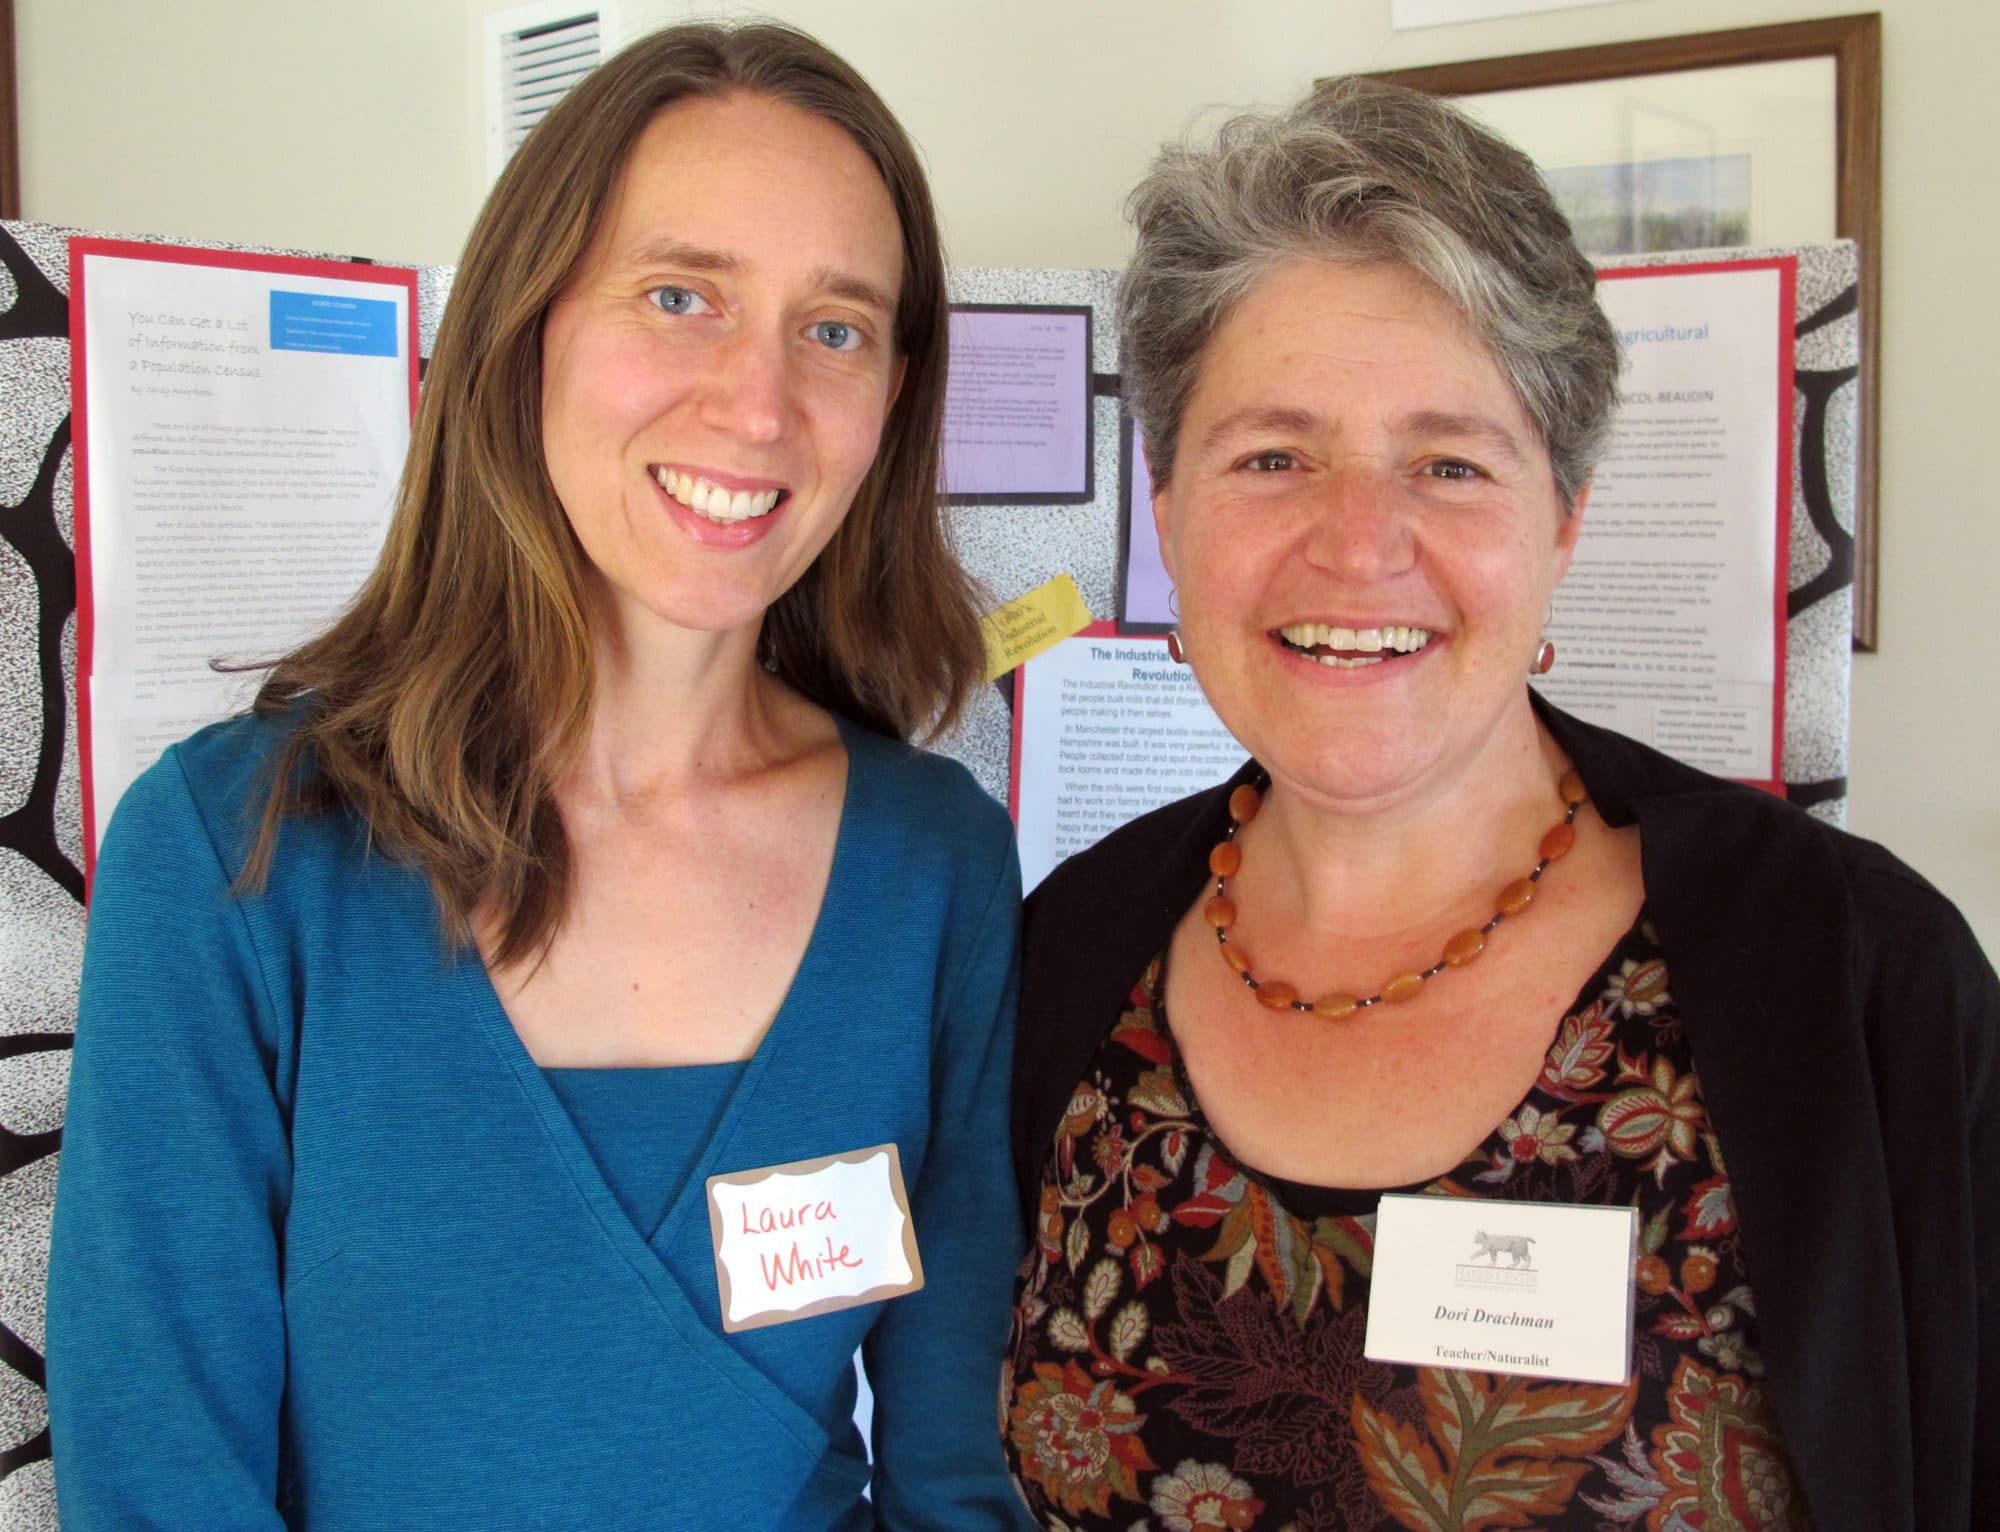 2013 Teacher of the Year Laura White and Harris Center naturalist Dori Drachman, in front of their students’ exhibit on land use history in Stoddard.